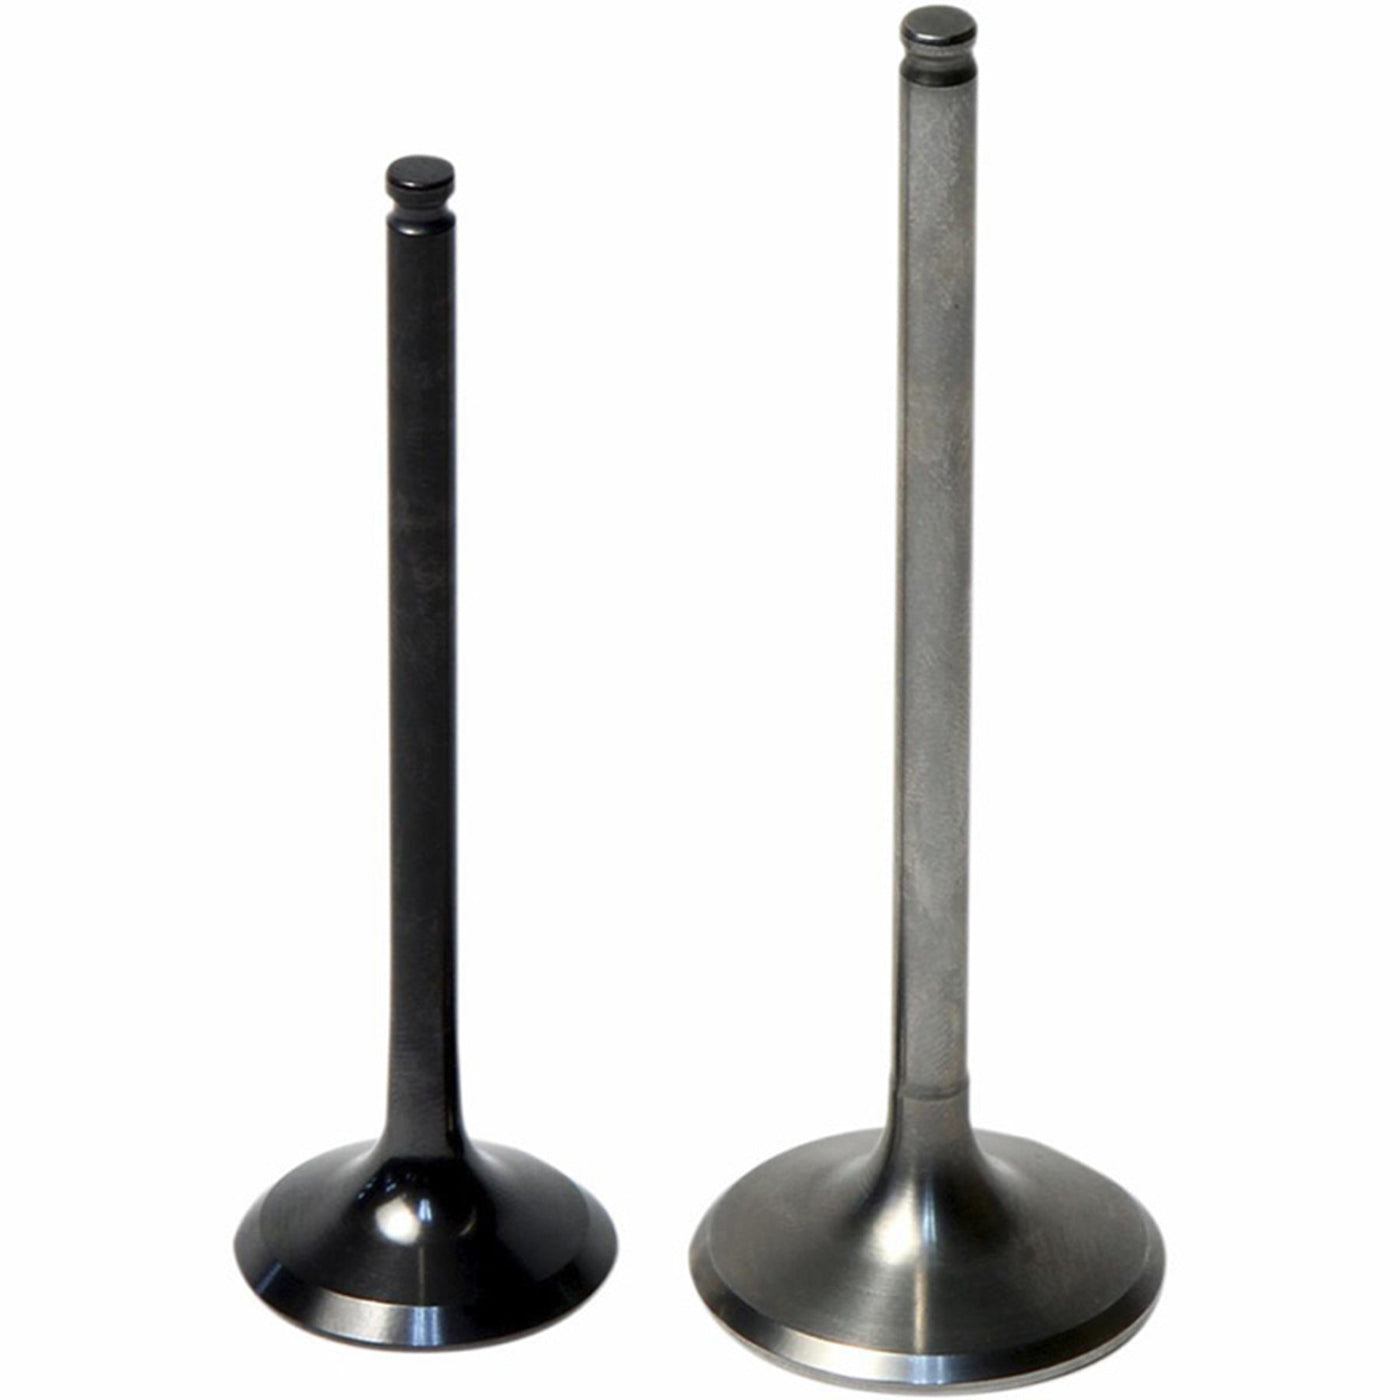 Hotcams 8400003-2 Intake and Exhaust Valves #8400003-2